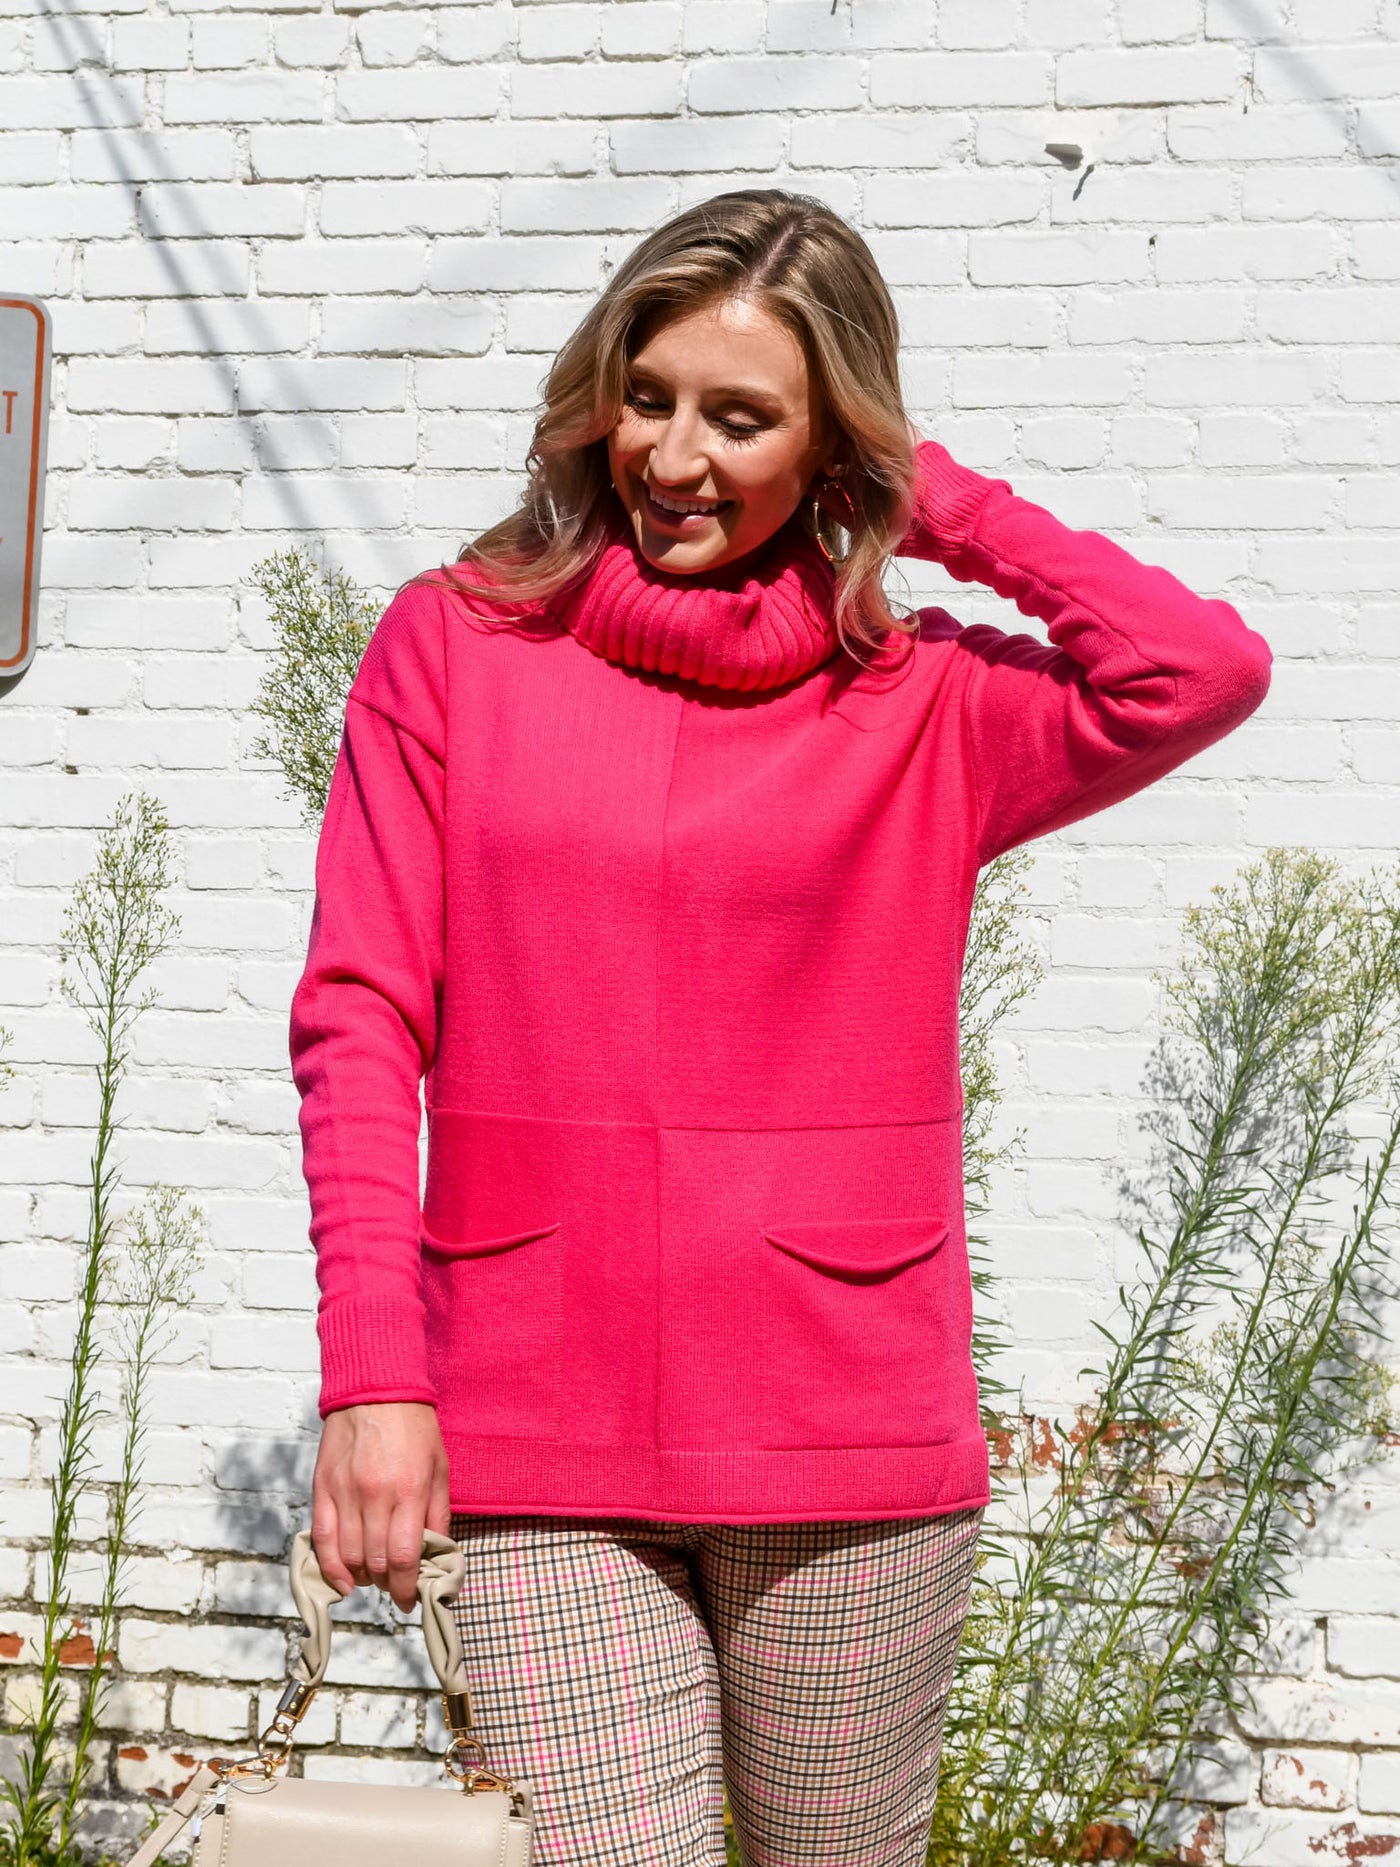 A model wearing a hot pink turtleneck sweater with seam details. The model has it paired with a pink and brown plaid trouser.